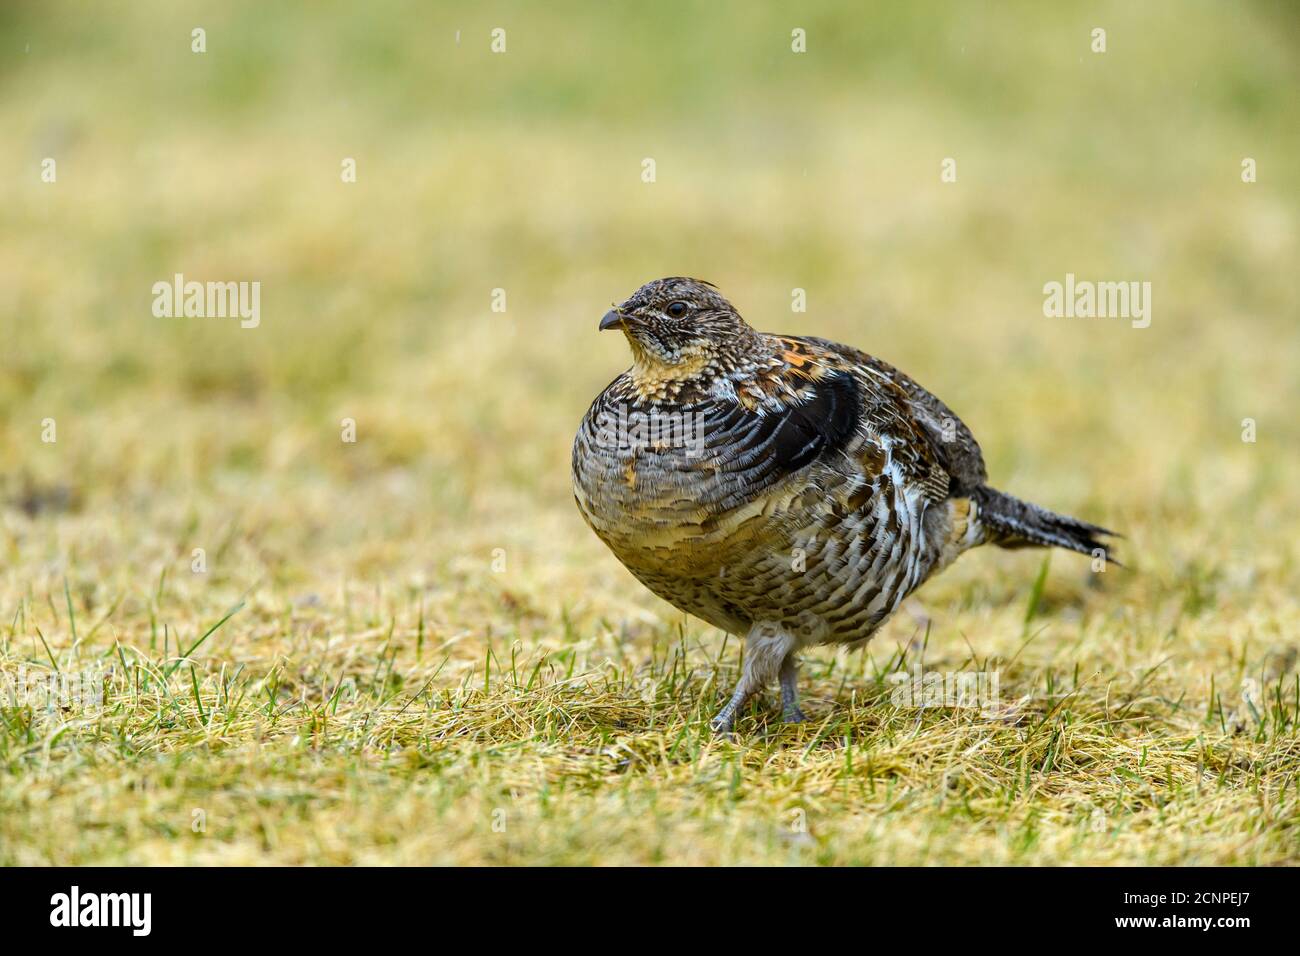 Ruffed grouse (Bonassa umbellus) foraging on an early spring lawn, Greater Sudbury, Ontario, Canada Stock Photo